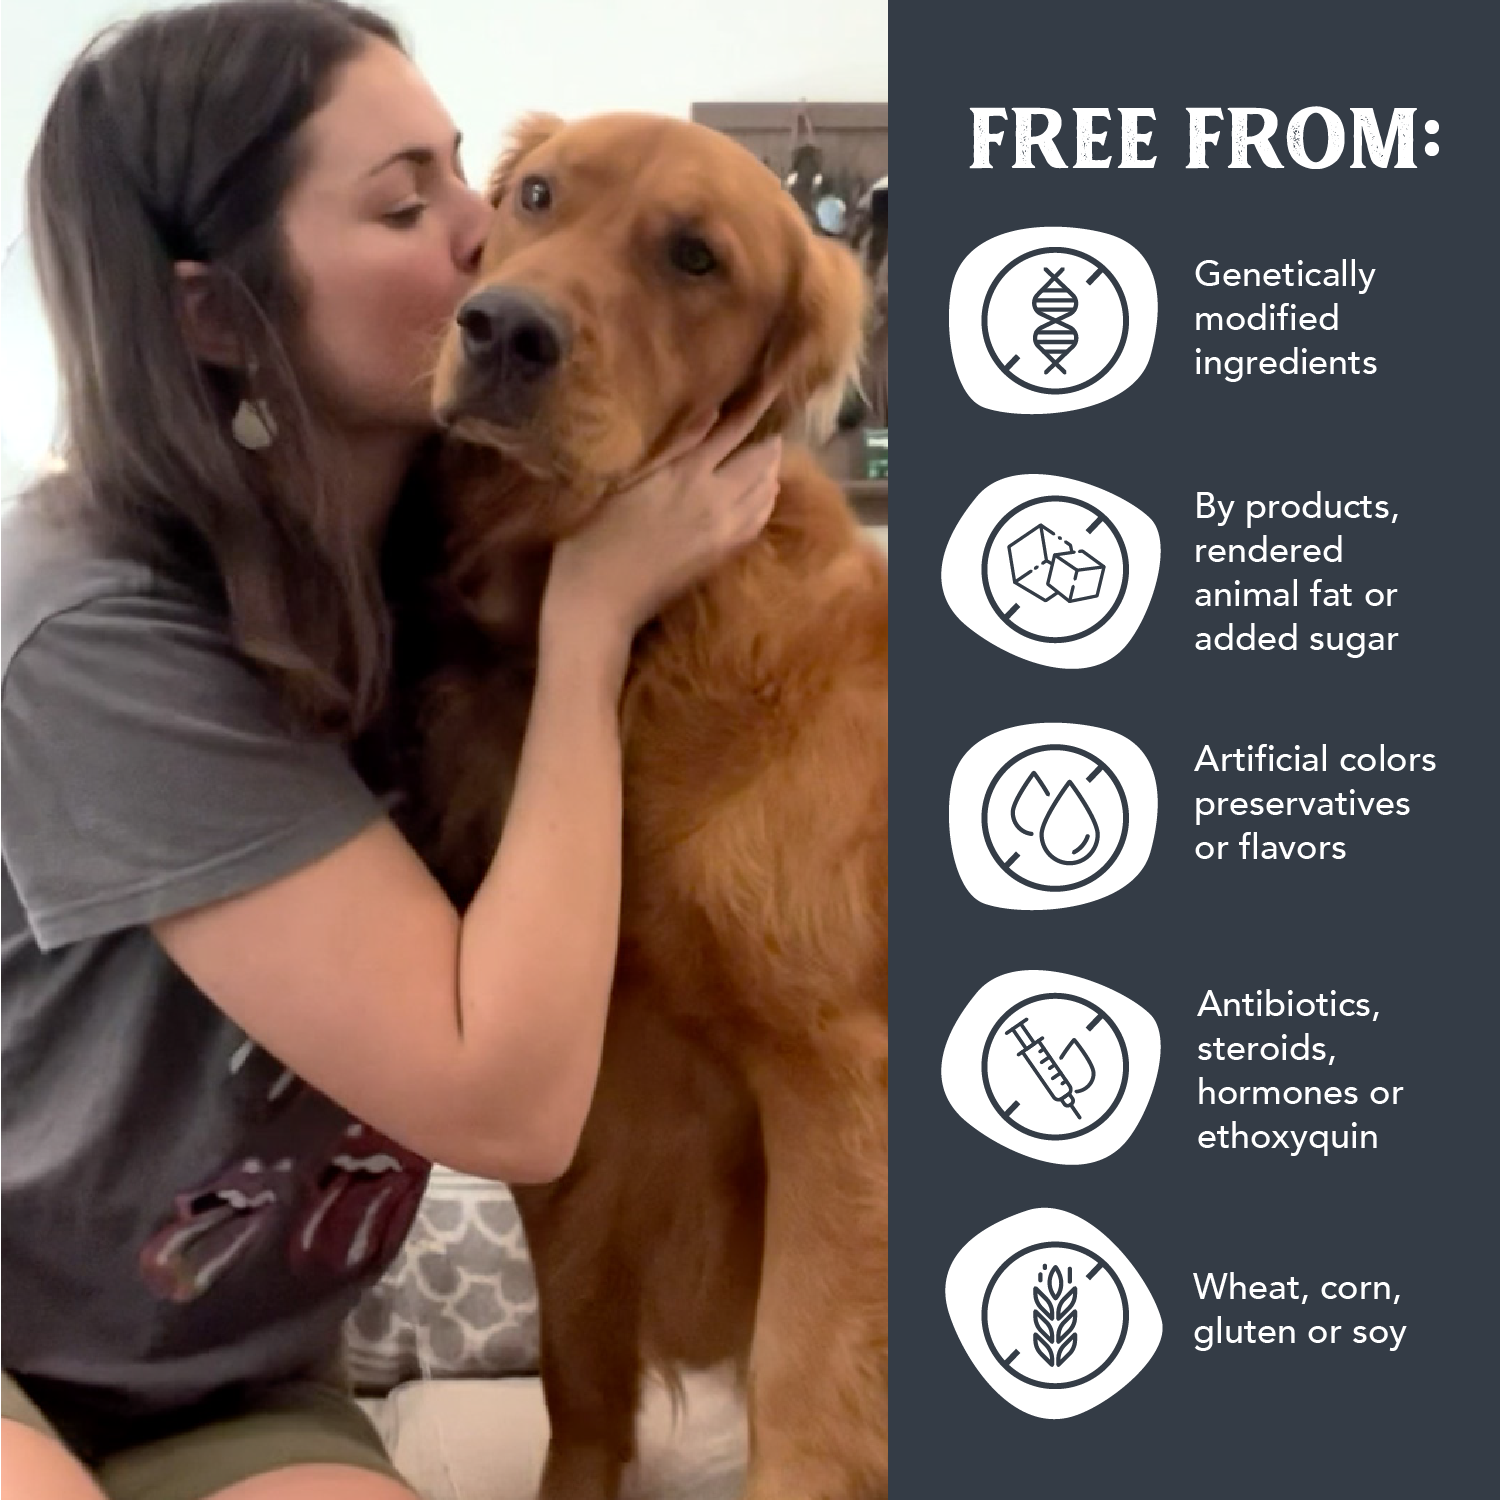 Image of a woman and golden retriever, highlighting Health Extension's Air Dried Dog food 'Free From' qualities.